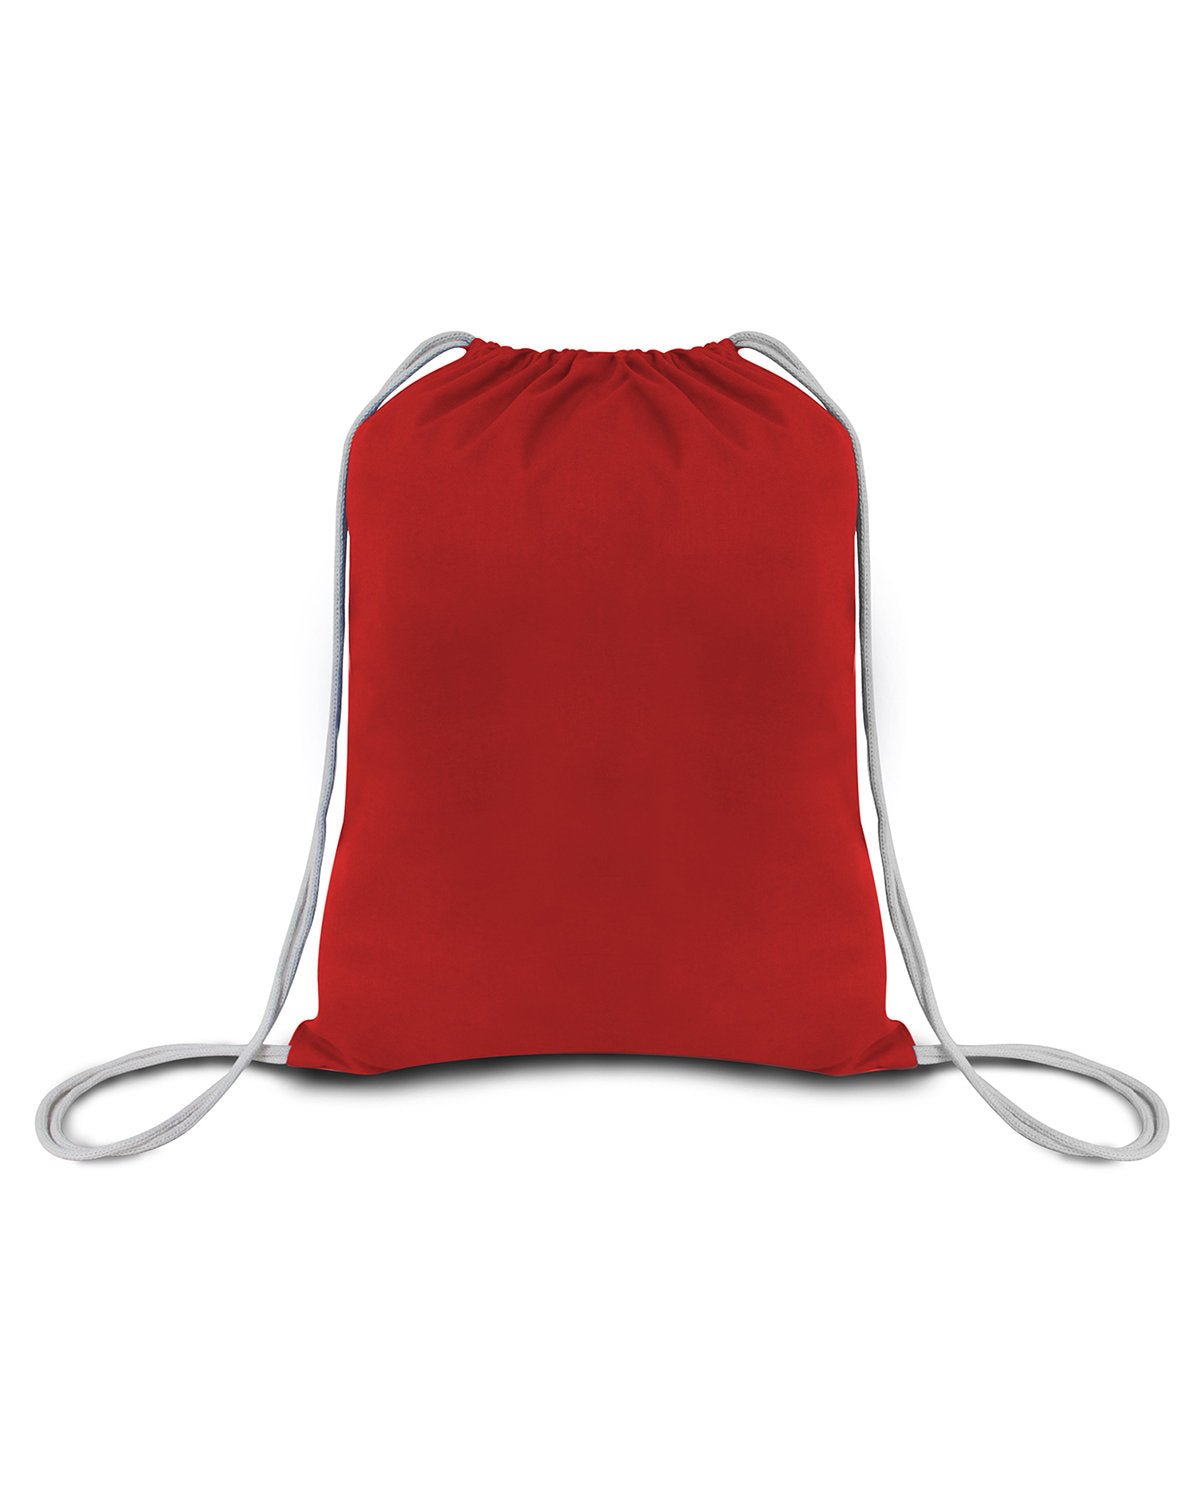 OAD101-OAD-RED-OAD-Bags and Accessories-1